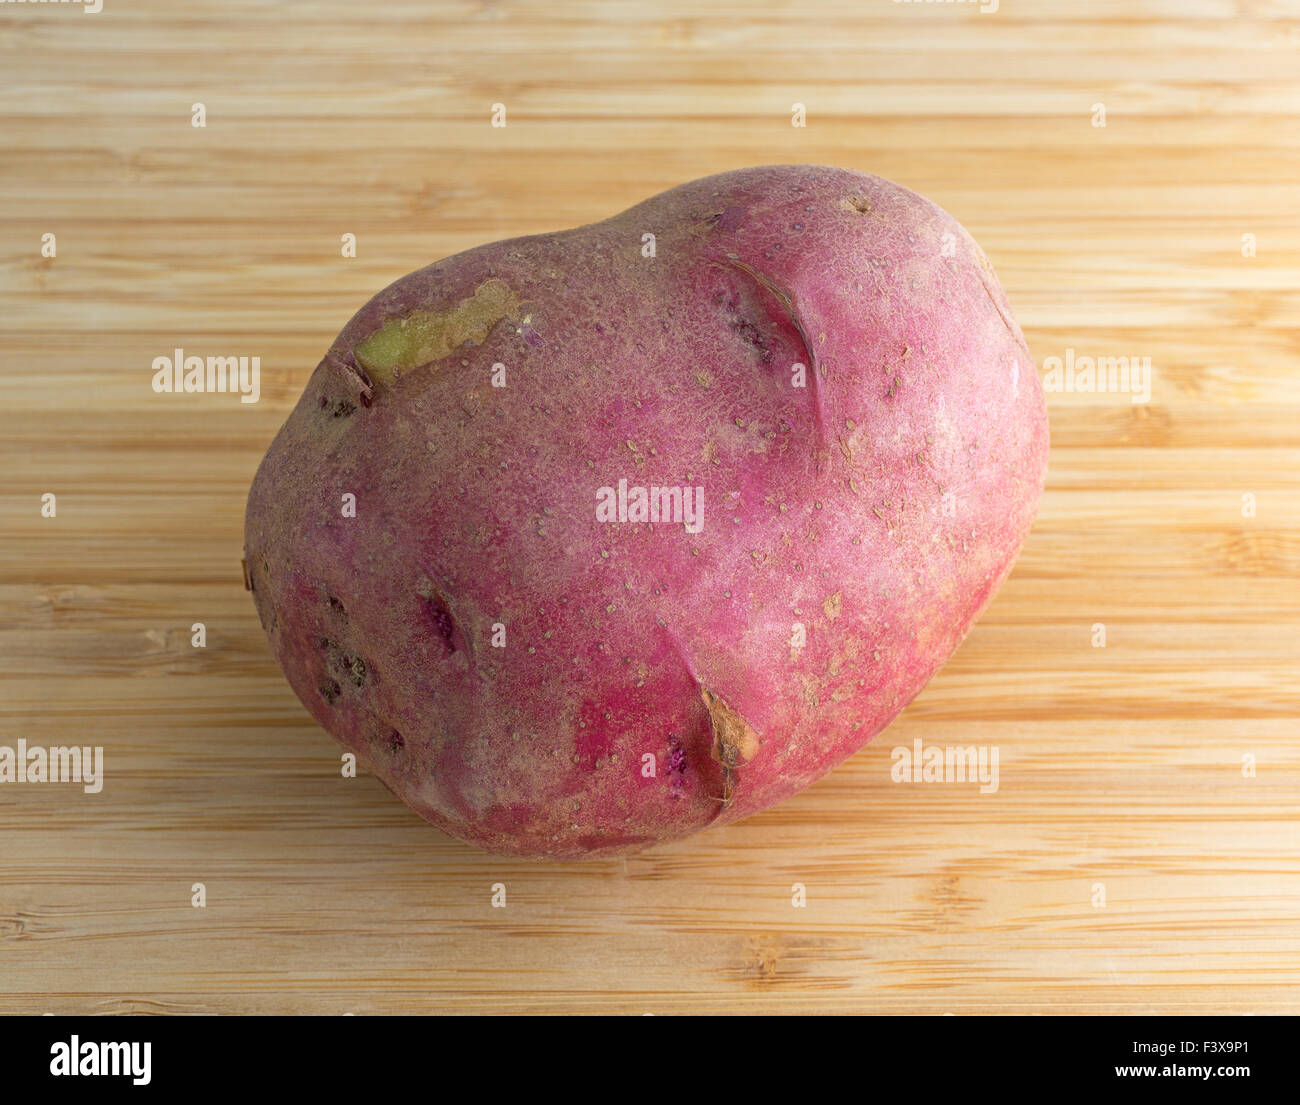 An organically grown red potato on a wood cutting board illuminated with natural light. Stock Photo